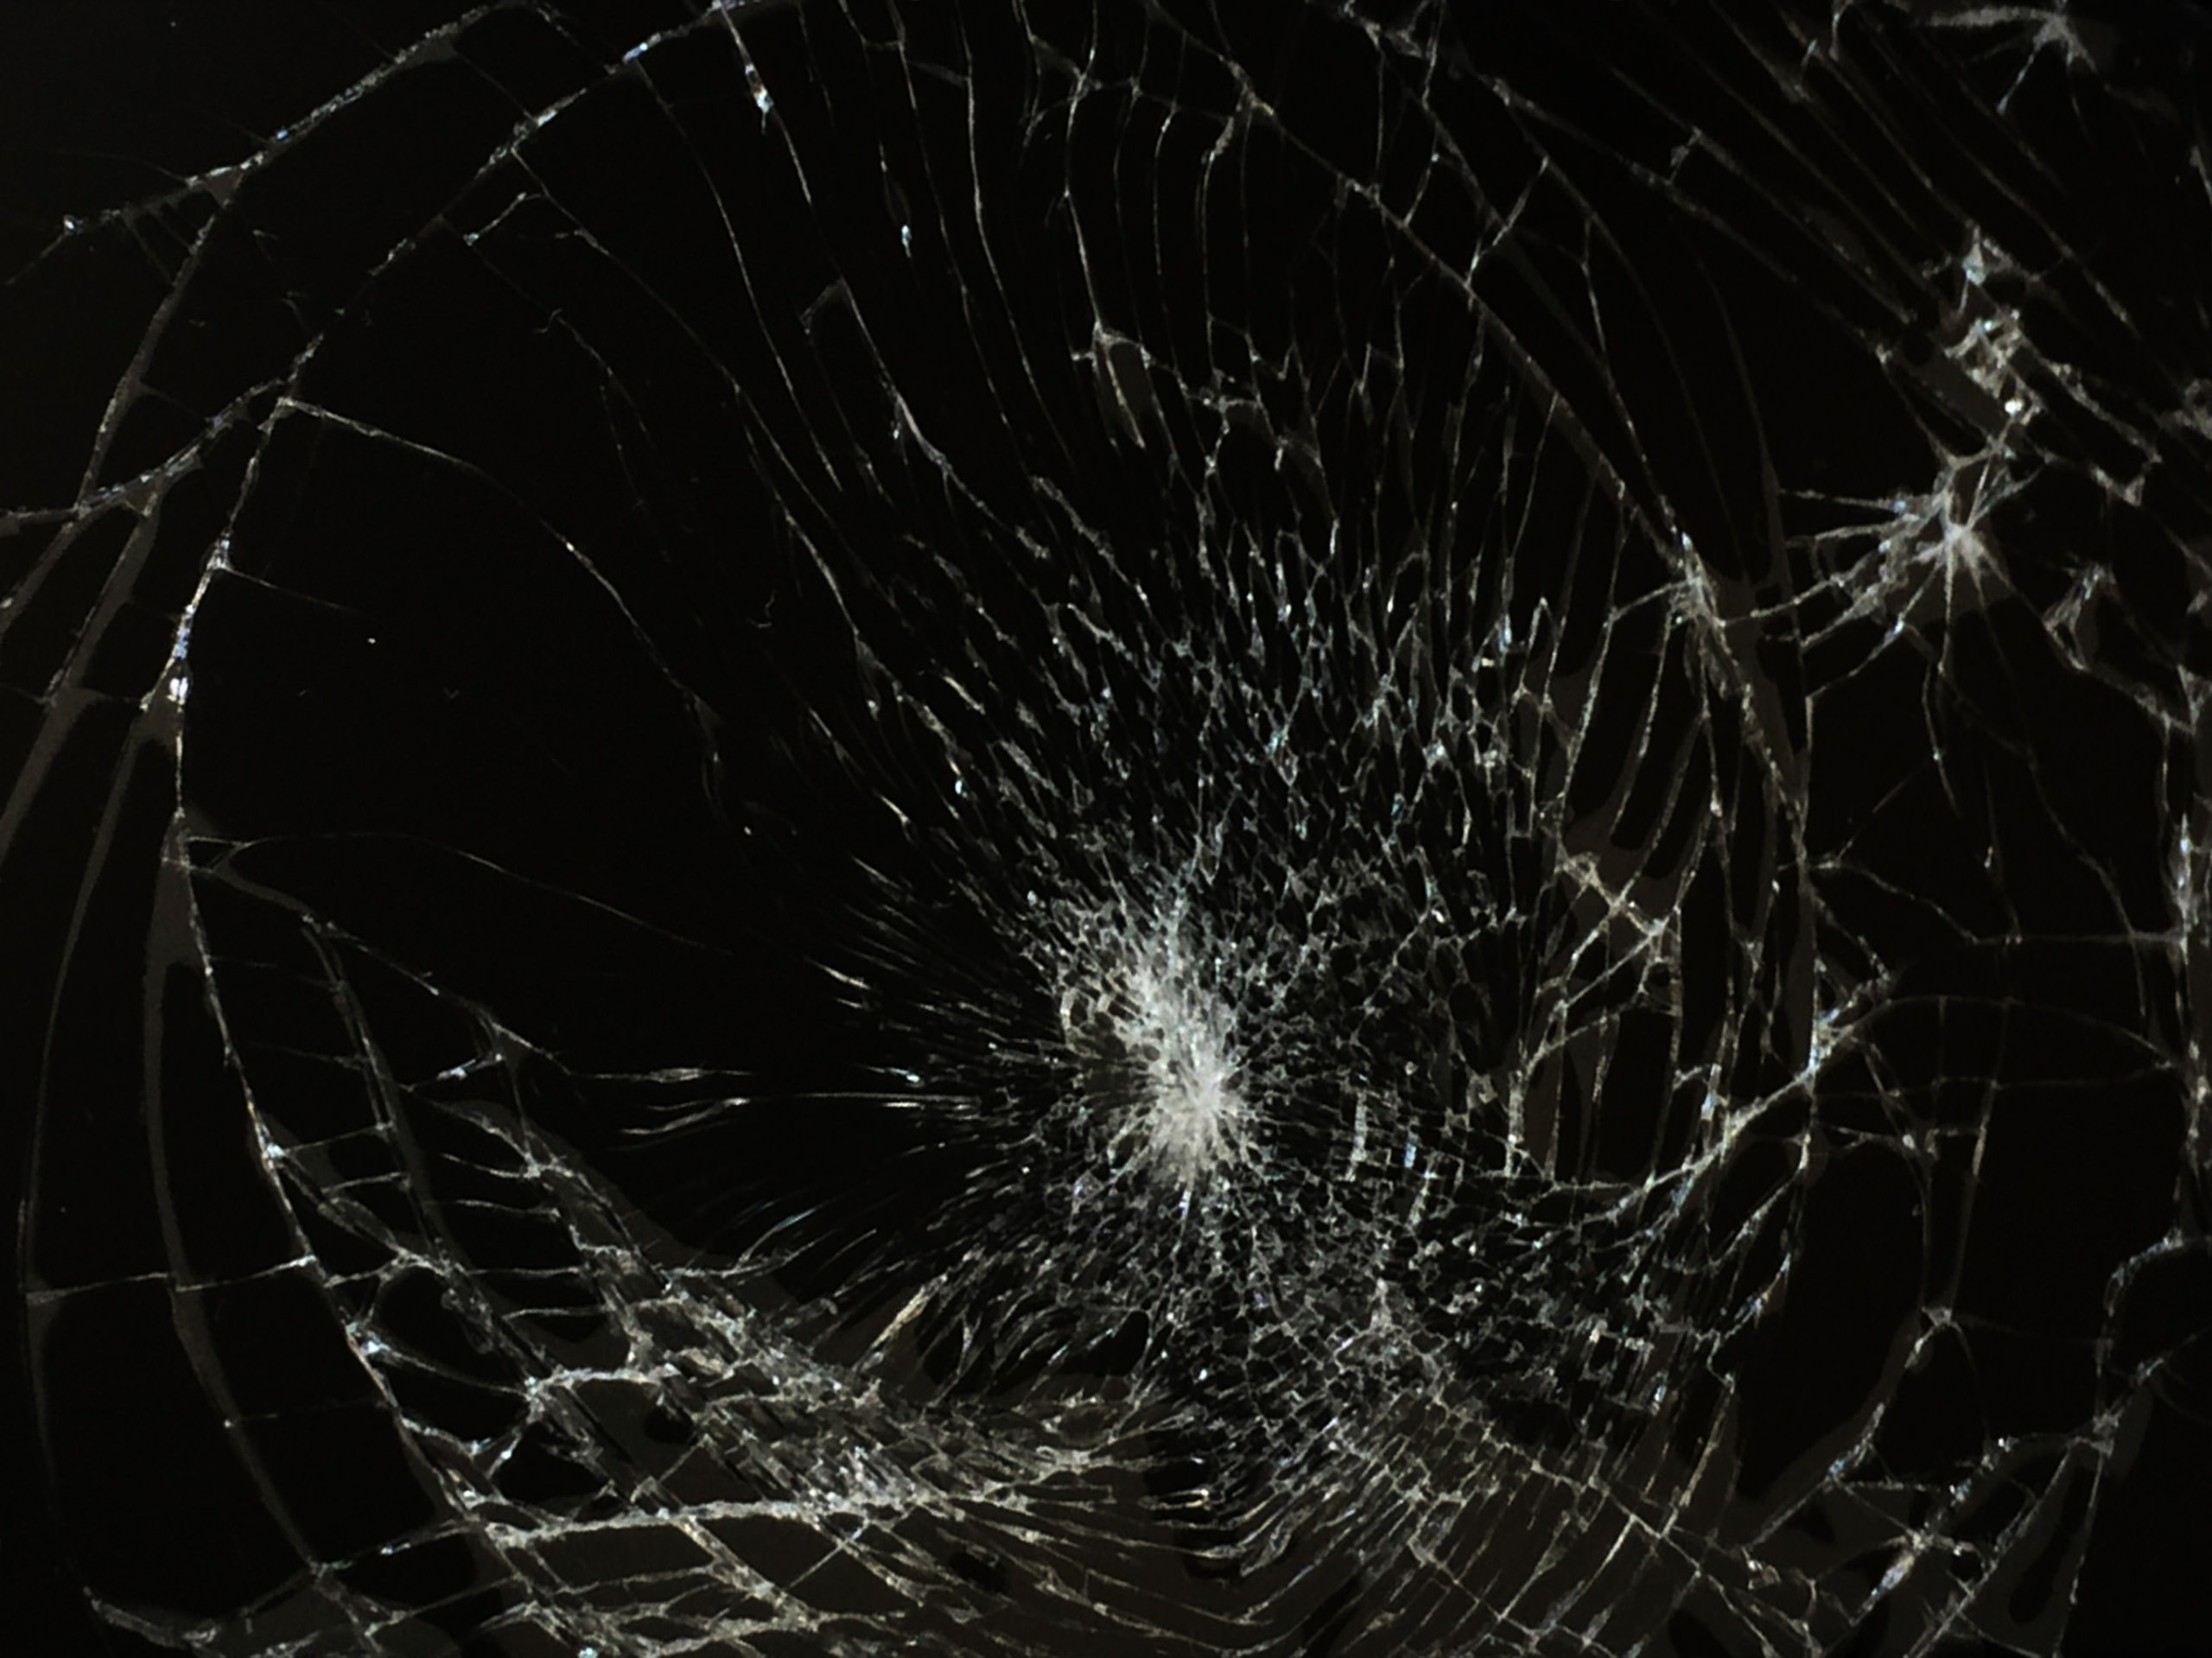 24 Broken Cracked Screen Wallpapers For iPhone, iPad or Tablets